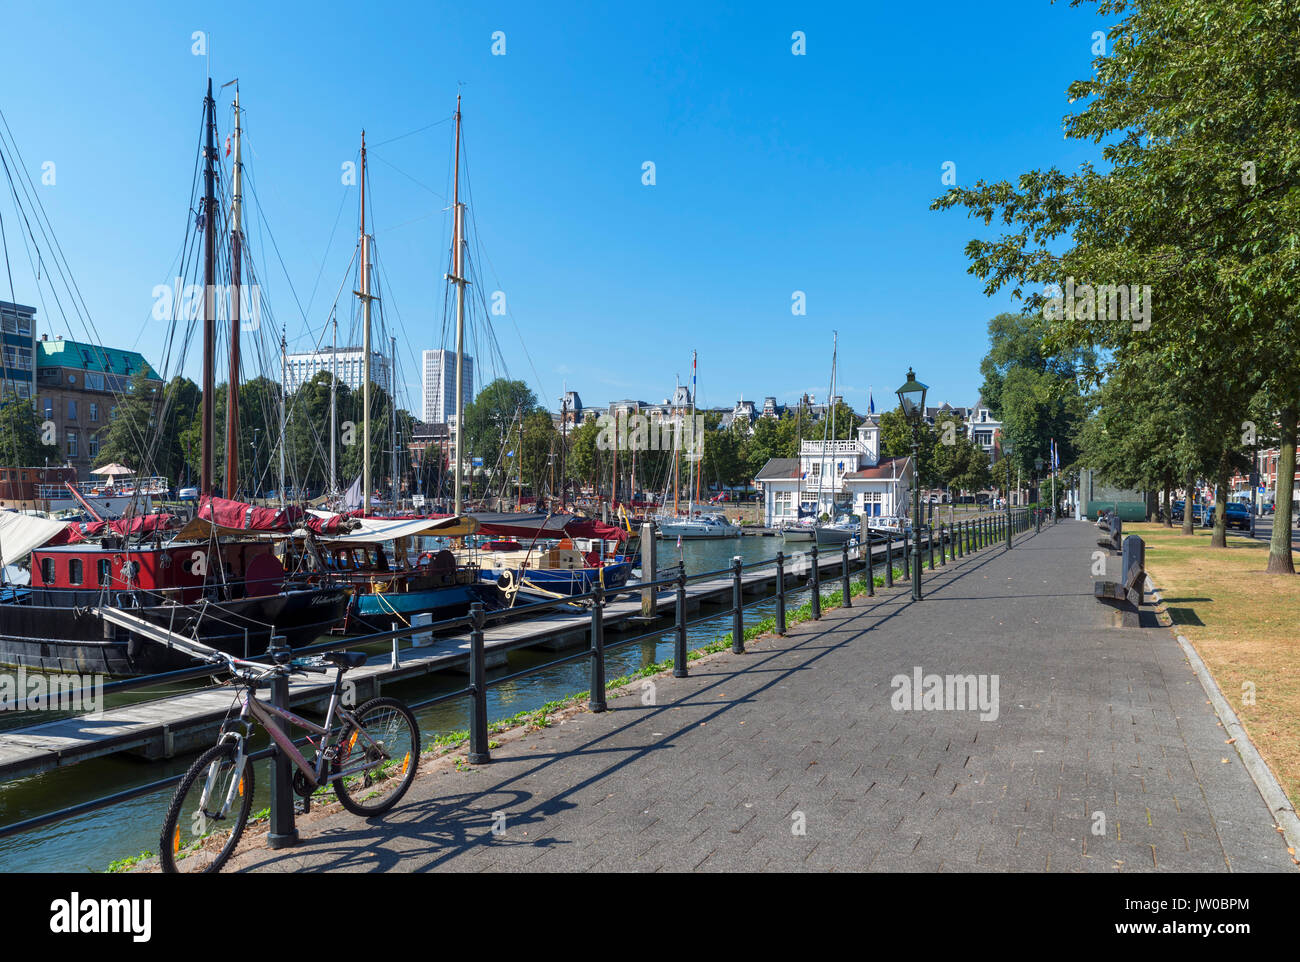 Boats in the Veerhaven, Rotterdam, Netherlands Stock Photo